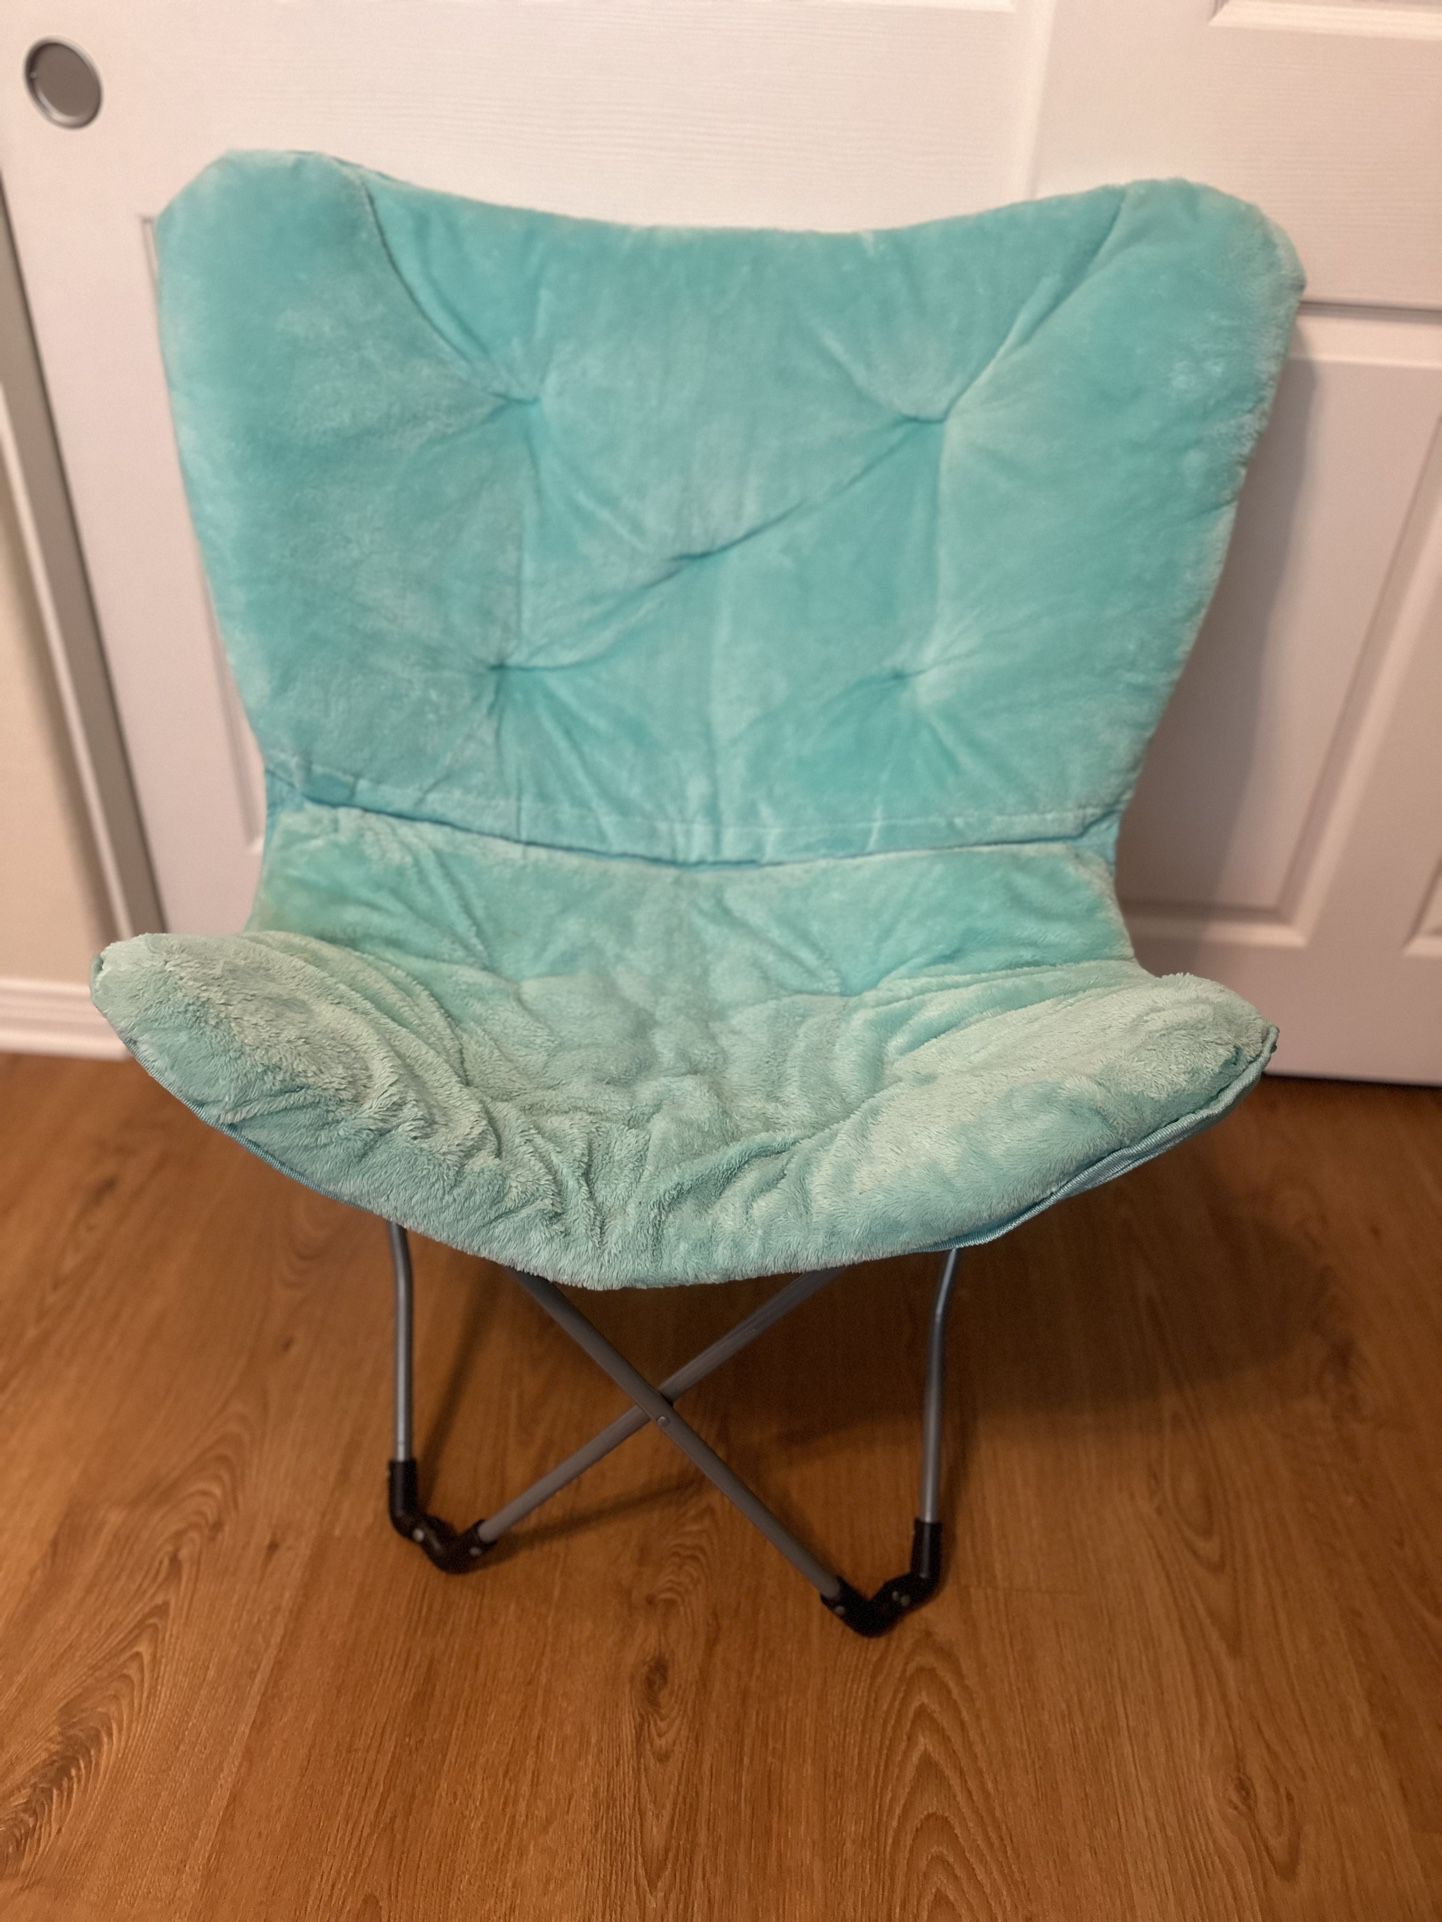 Teal Butterfly Chair